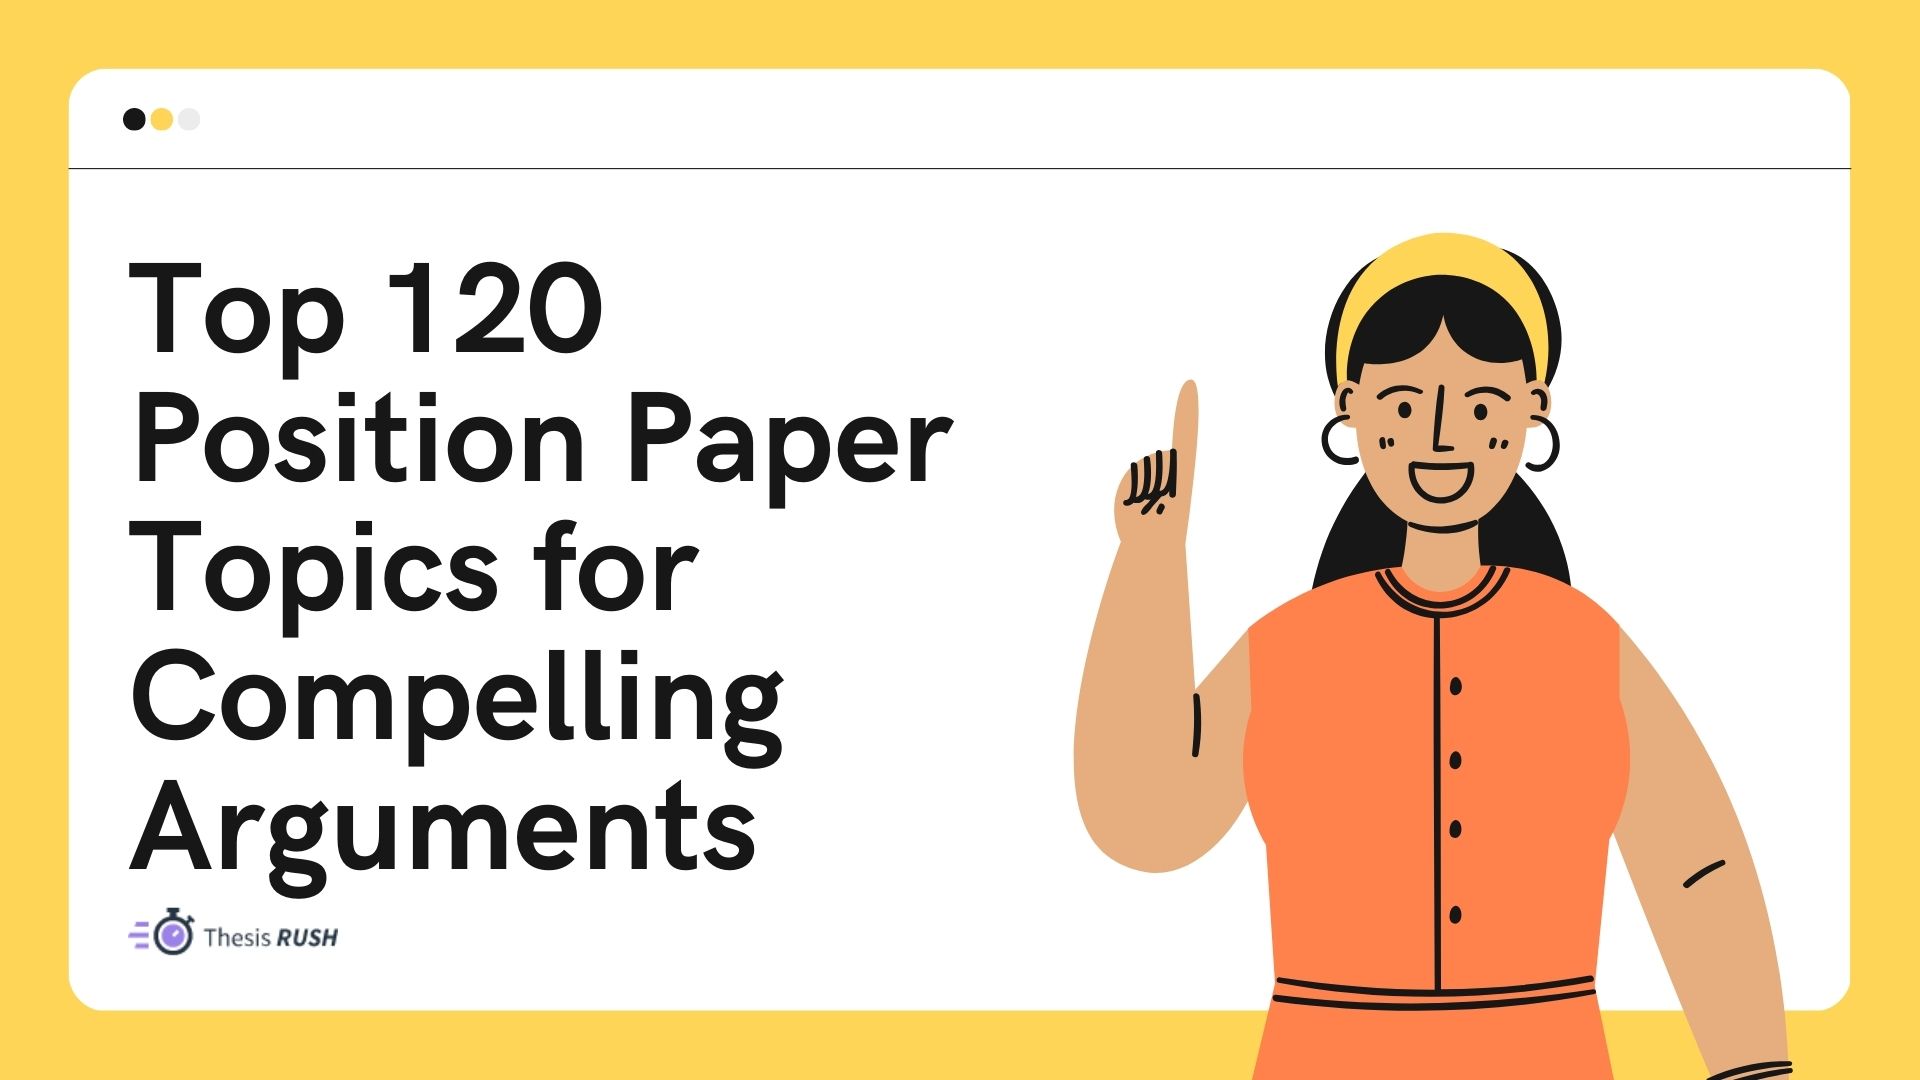 Top 120 Position Paper Topics for Compelling Arguments